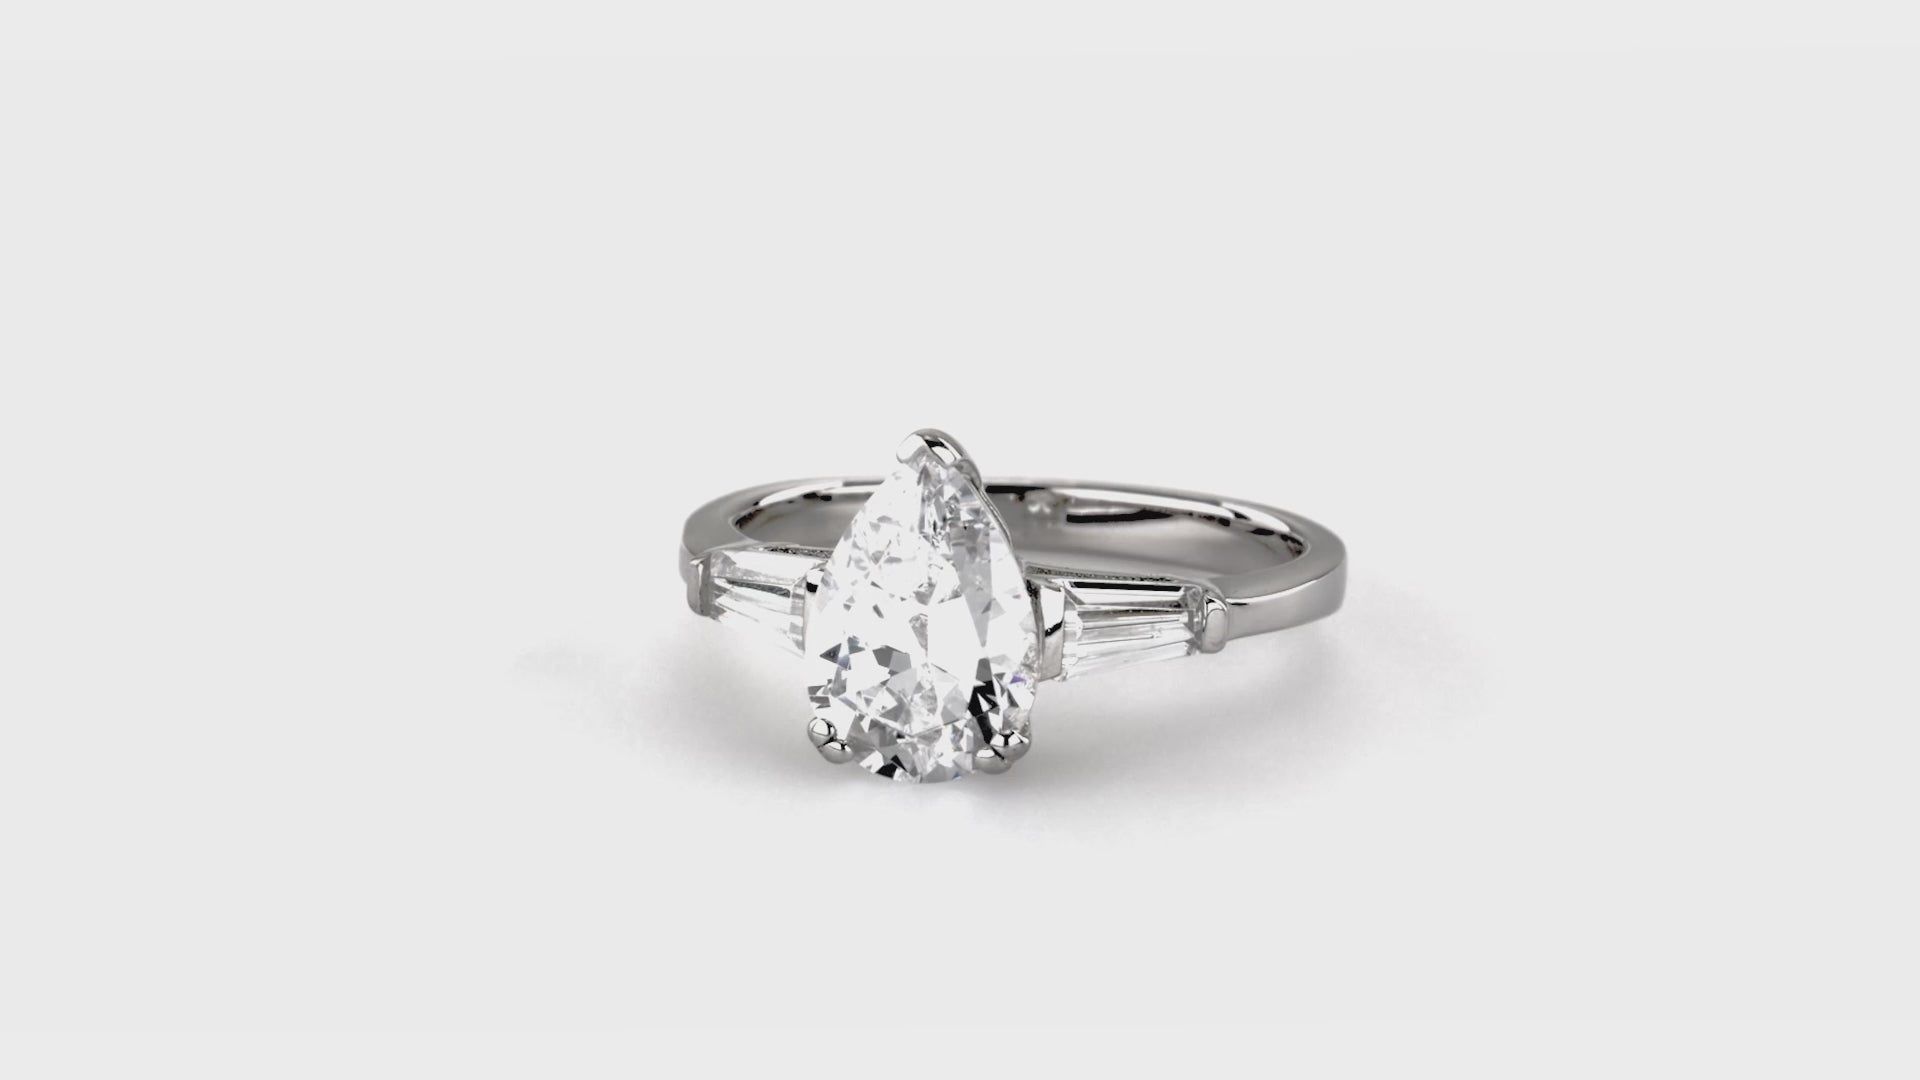 Video Contains 7-Stone Solitaire CZ Ring Set in Sterling Silver. Style Number VR626-01